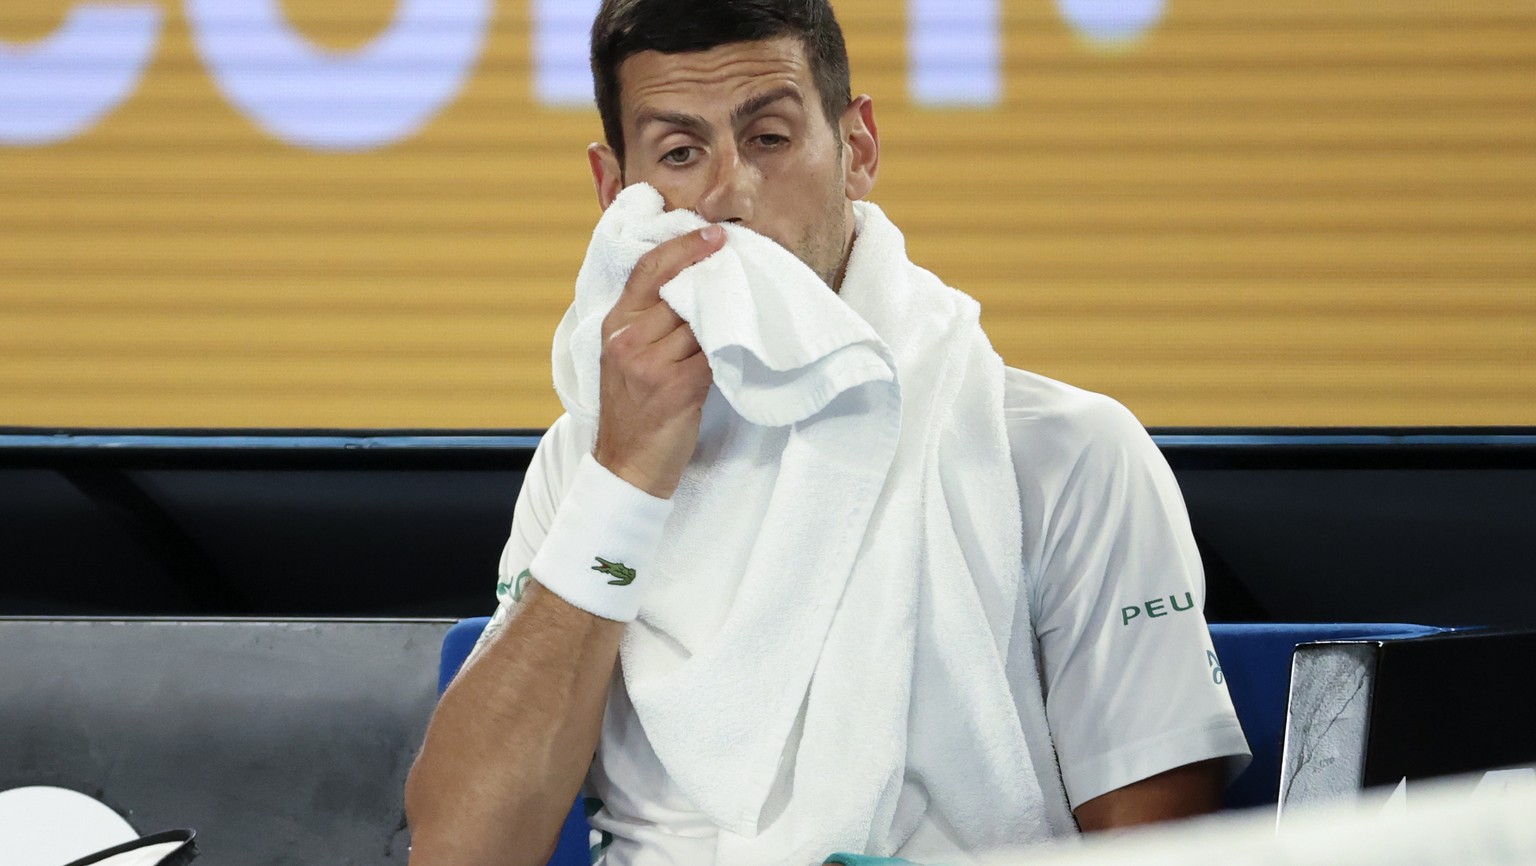 Serbia&#039;s Novak Djokovic wipes his face during a break in his fourth round match against Canada&#039;s Milos Raonic at the Australian Open tennis championship in Melbourne, Australia, Sunday, Feb. ...